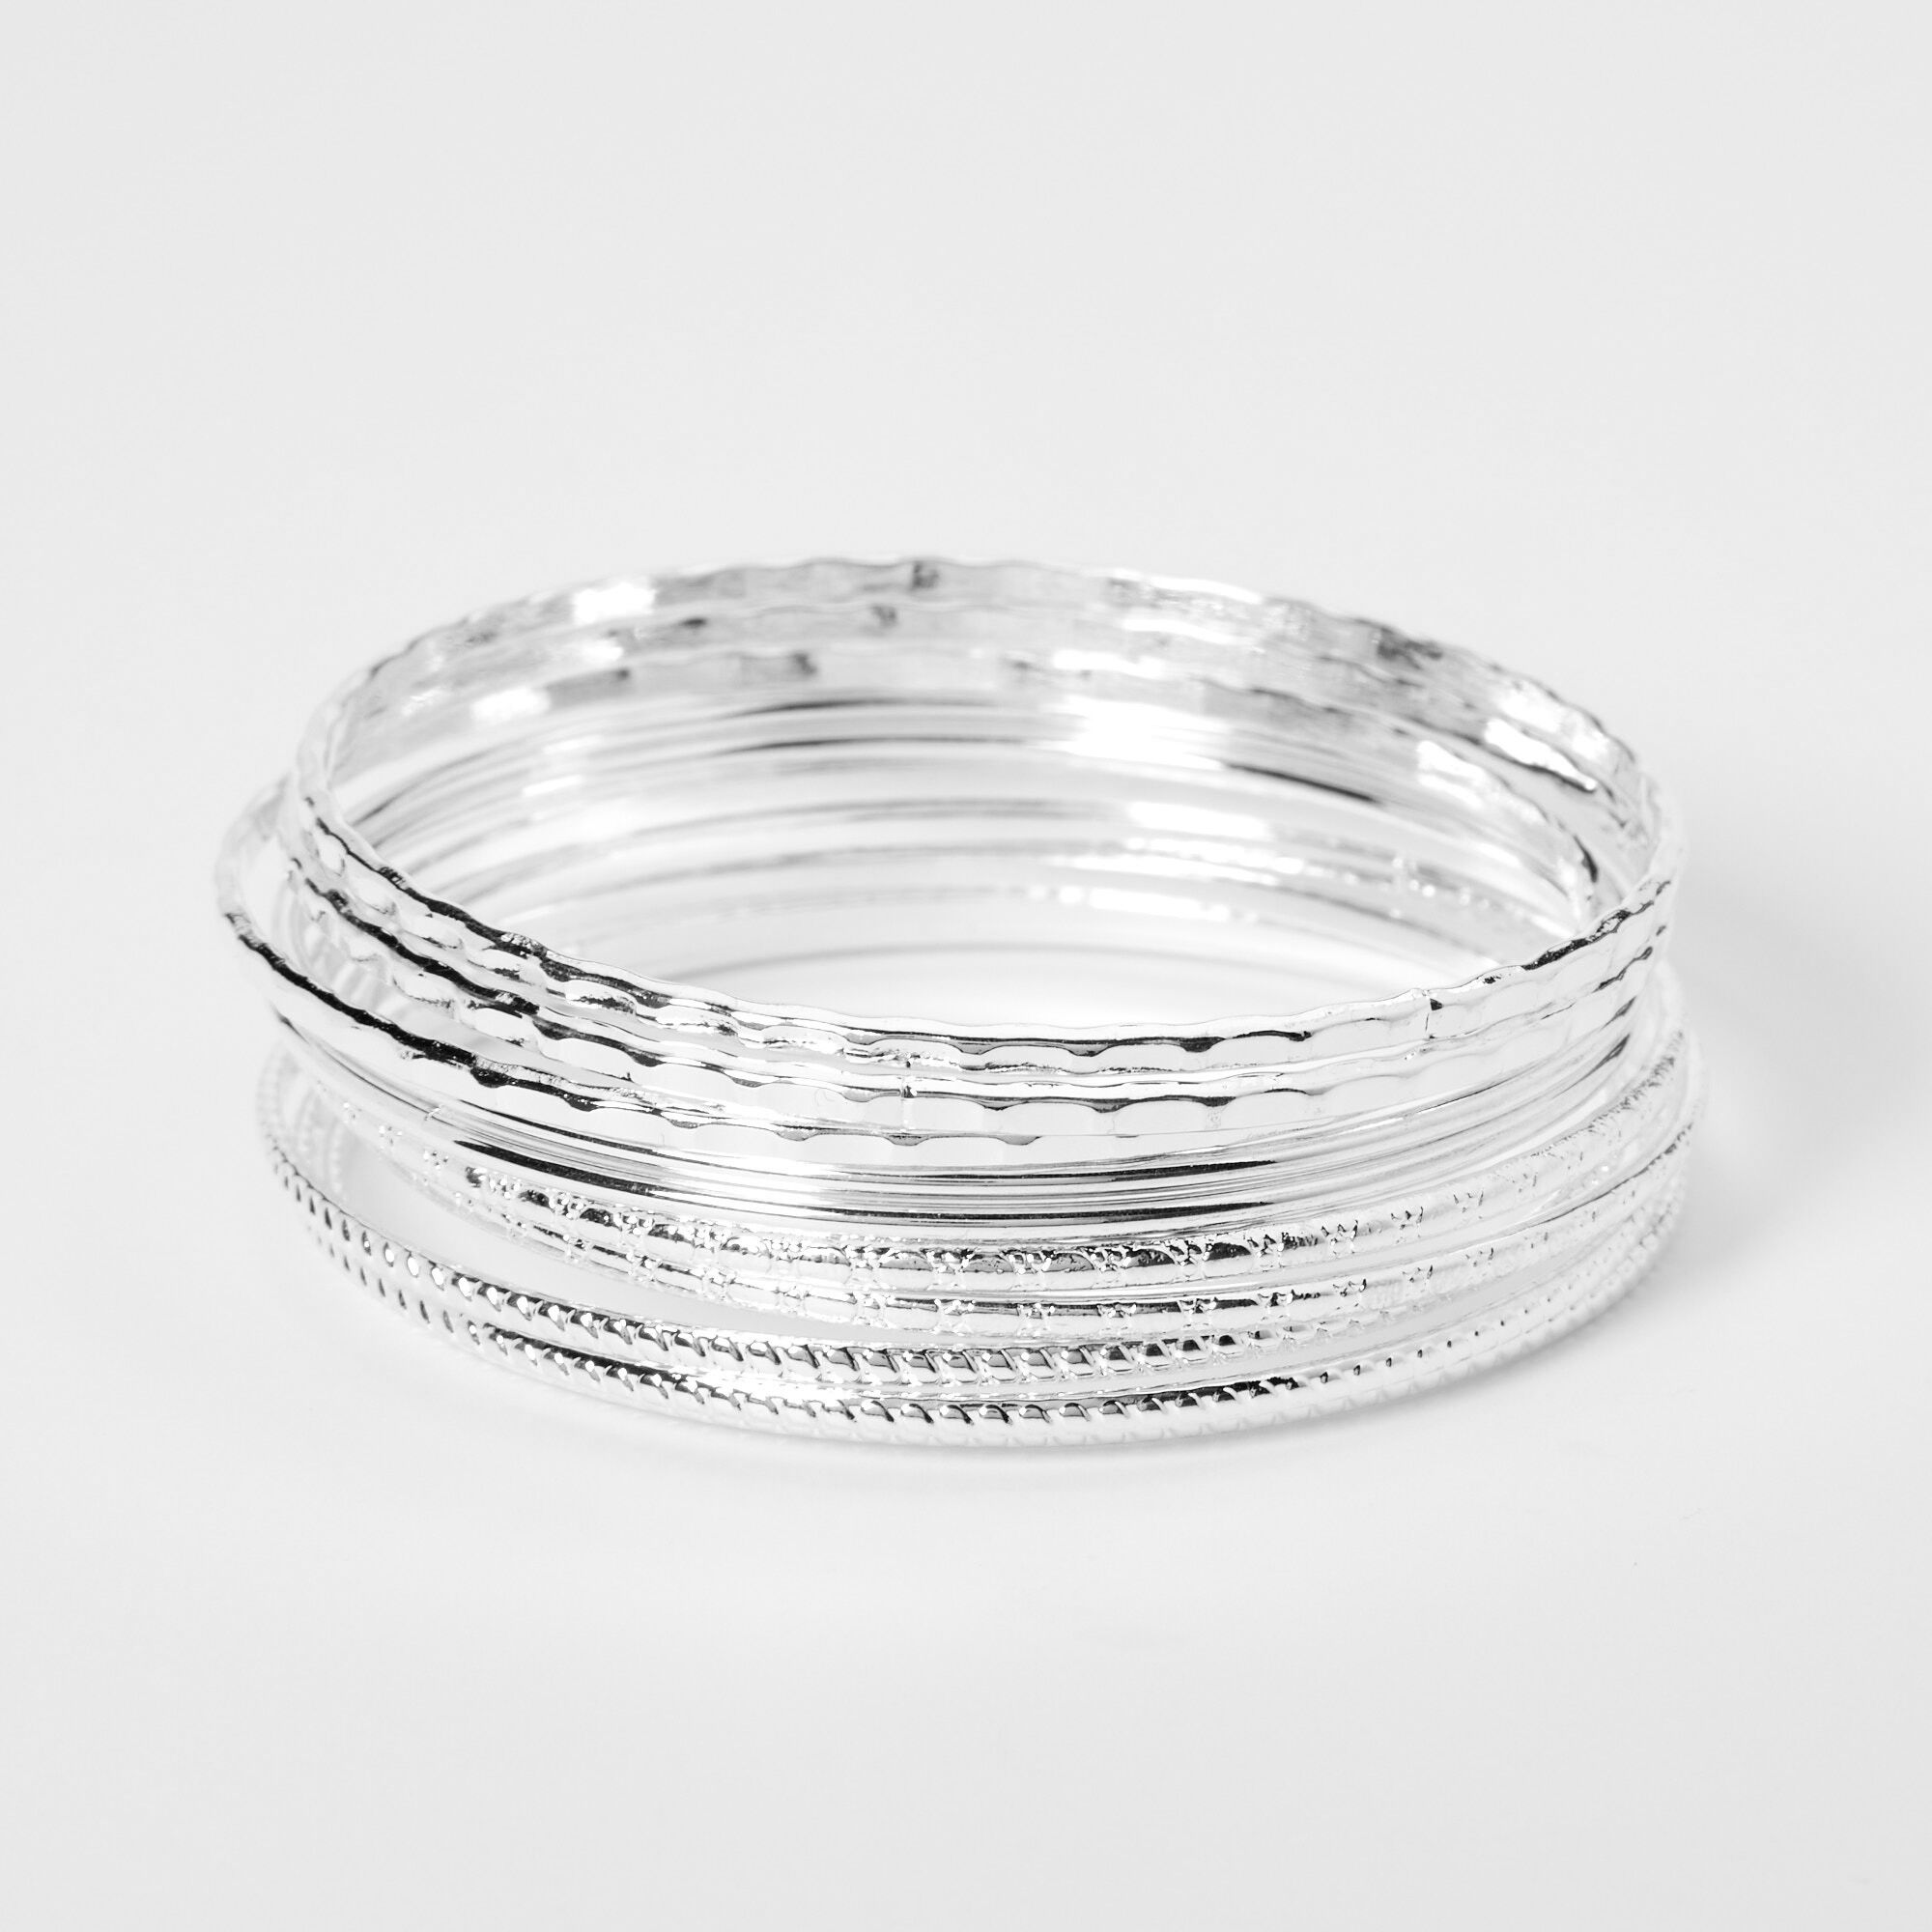 View Claires Tone Textured Bangle Bracelets 8 Pack Silver information